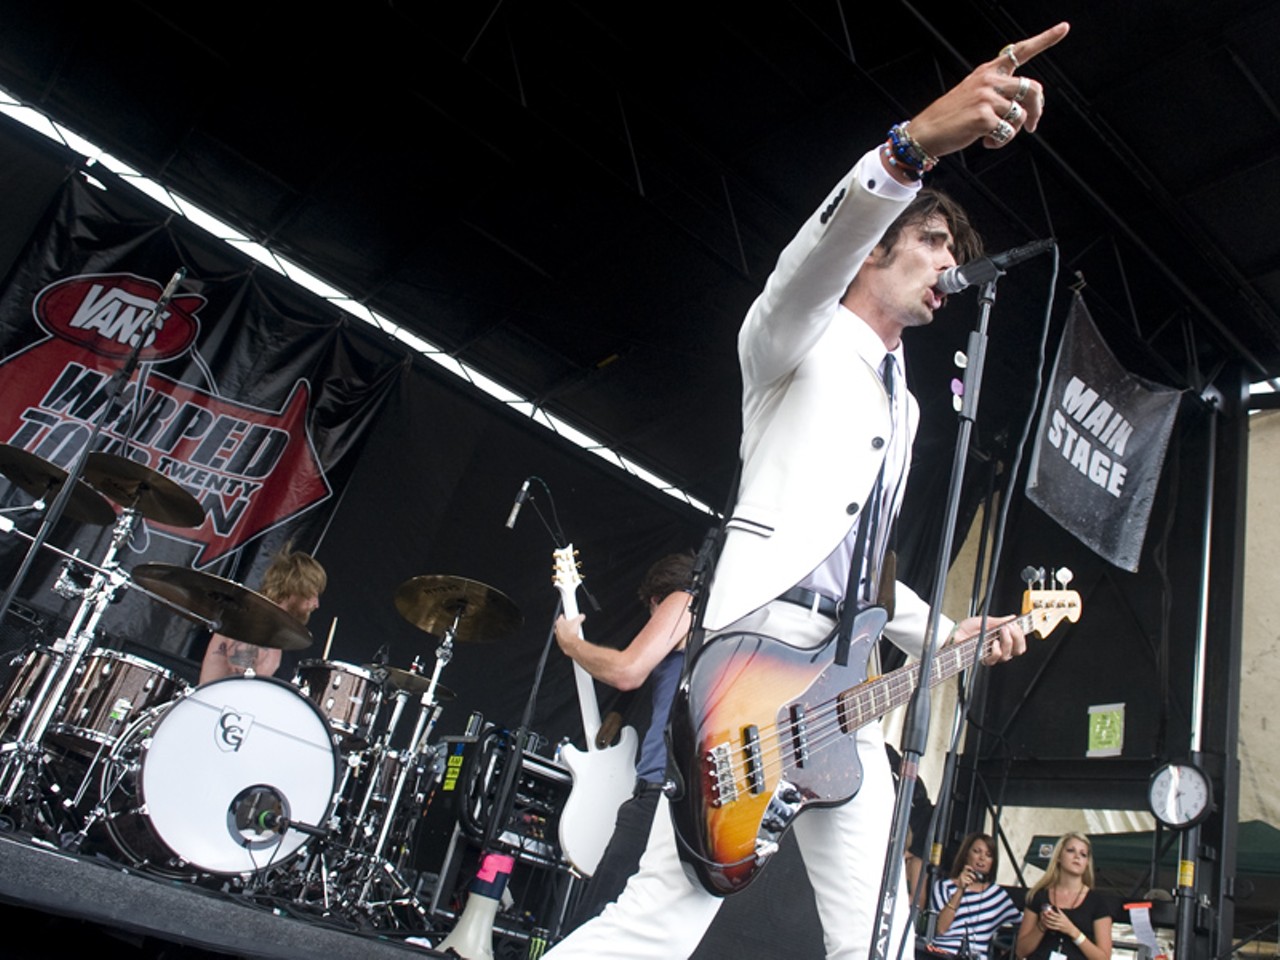 The All-American Rejects performing at the 2010 Vans Warped Tour in St. Louis.